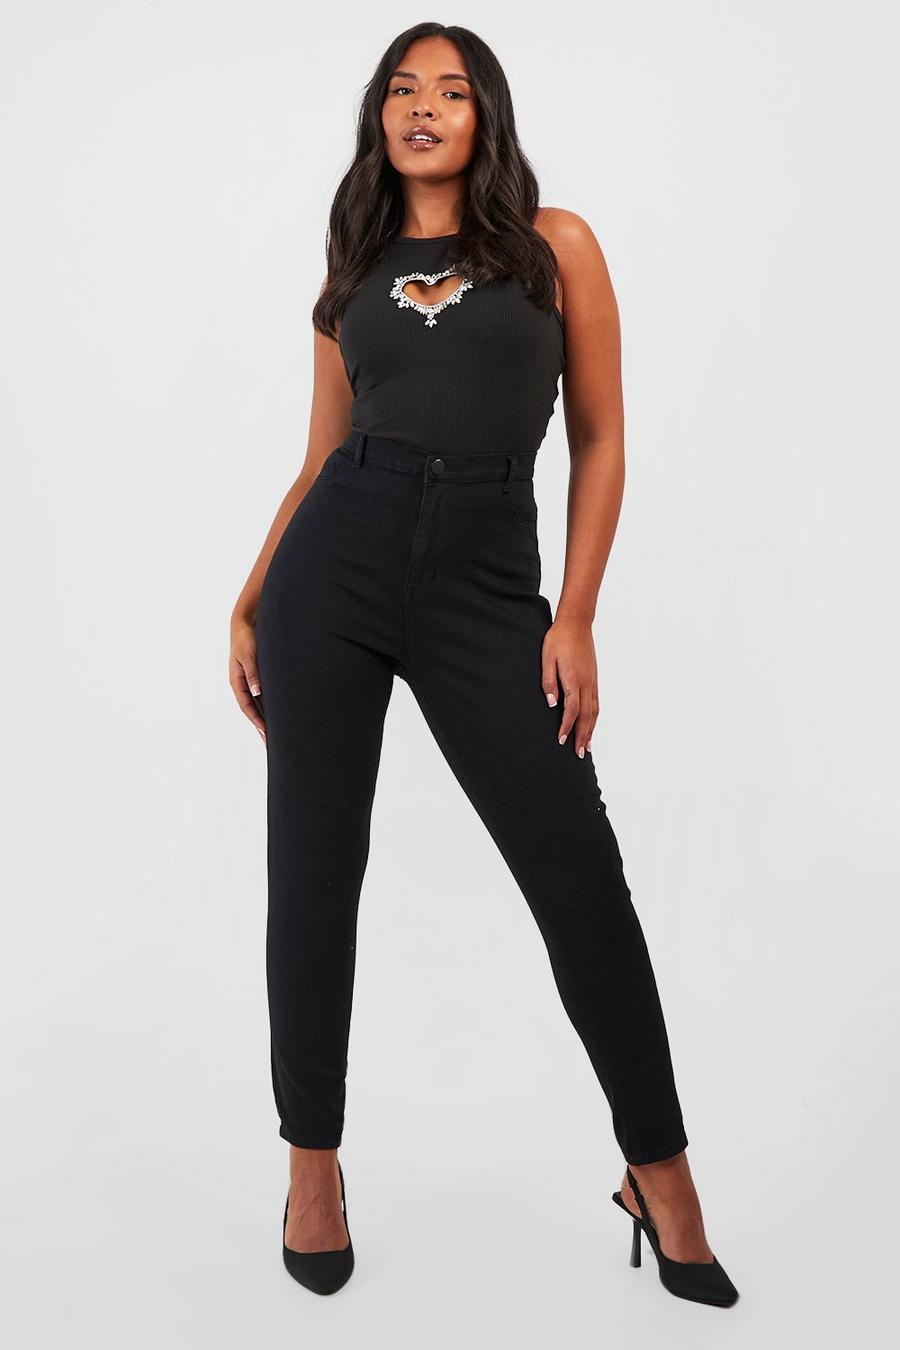 Grande taille - Jean stretch taille très haute coupe skinny, Black